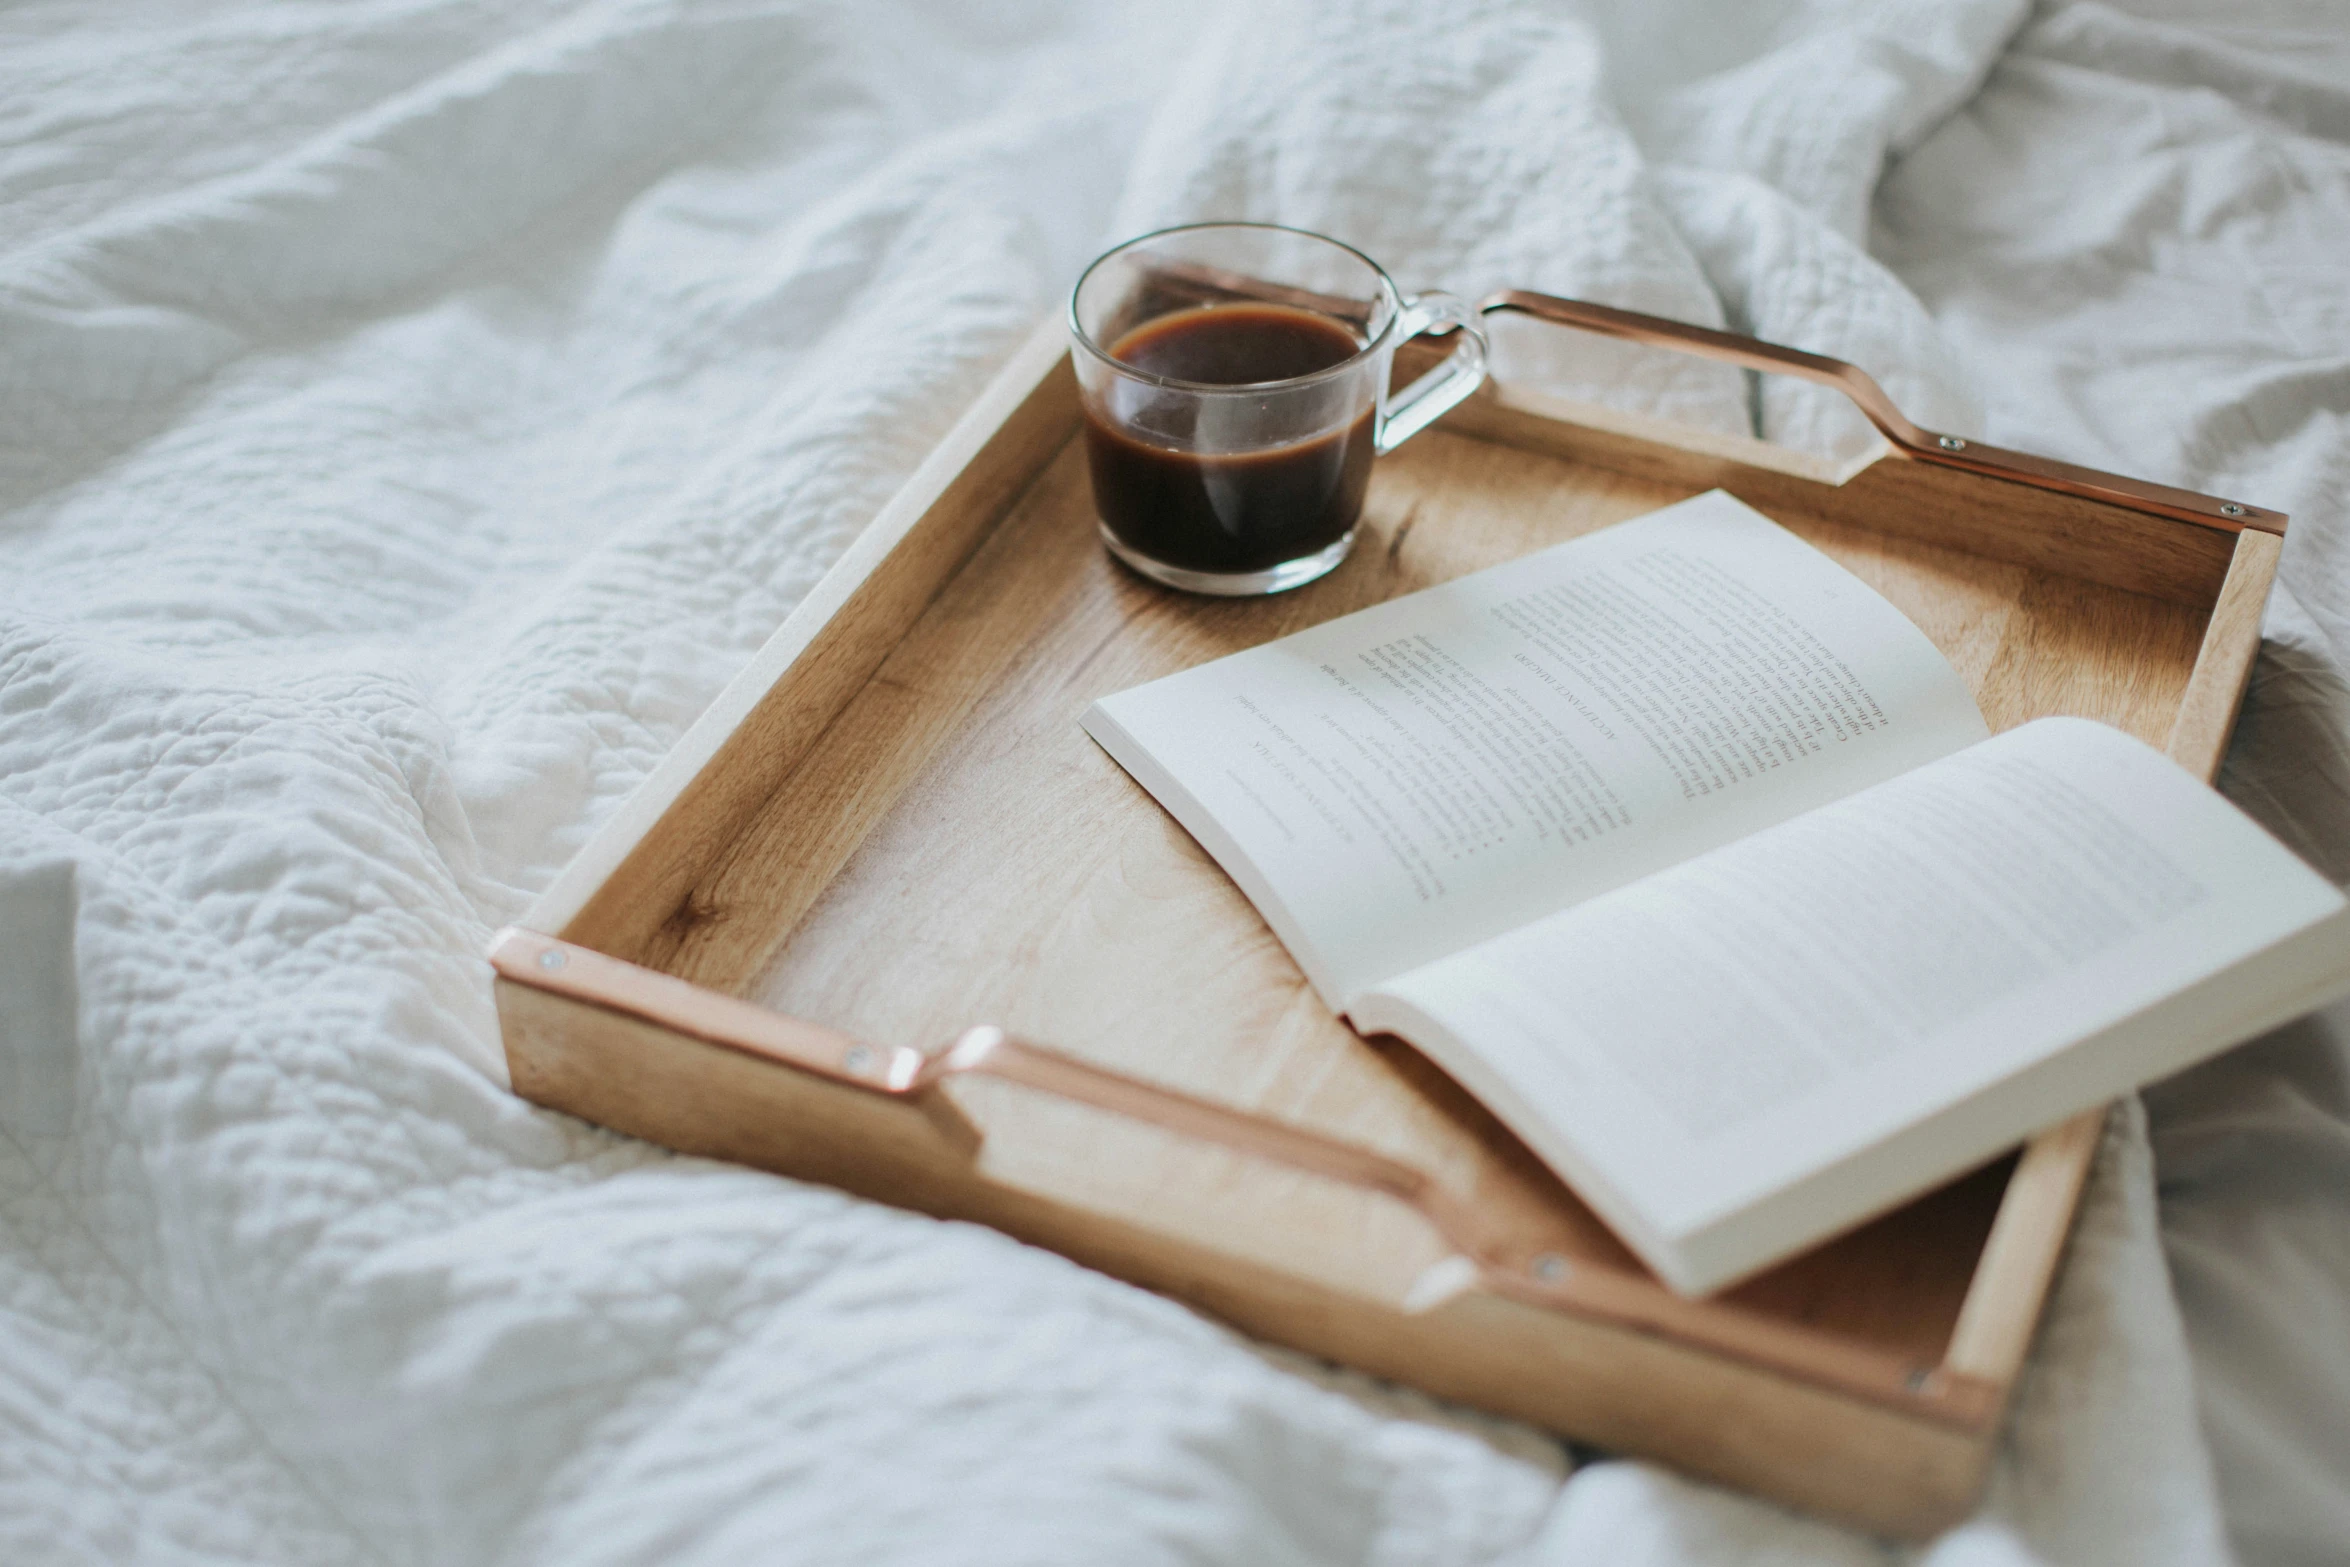 book on wooden tray with cup and spoon